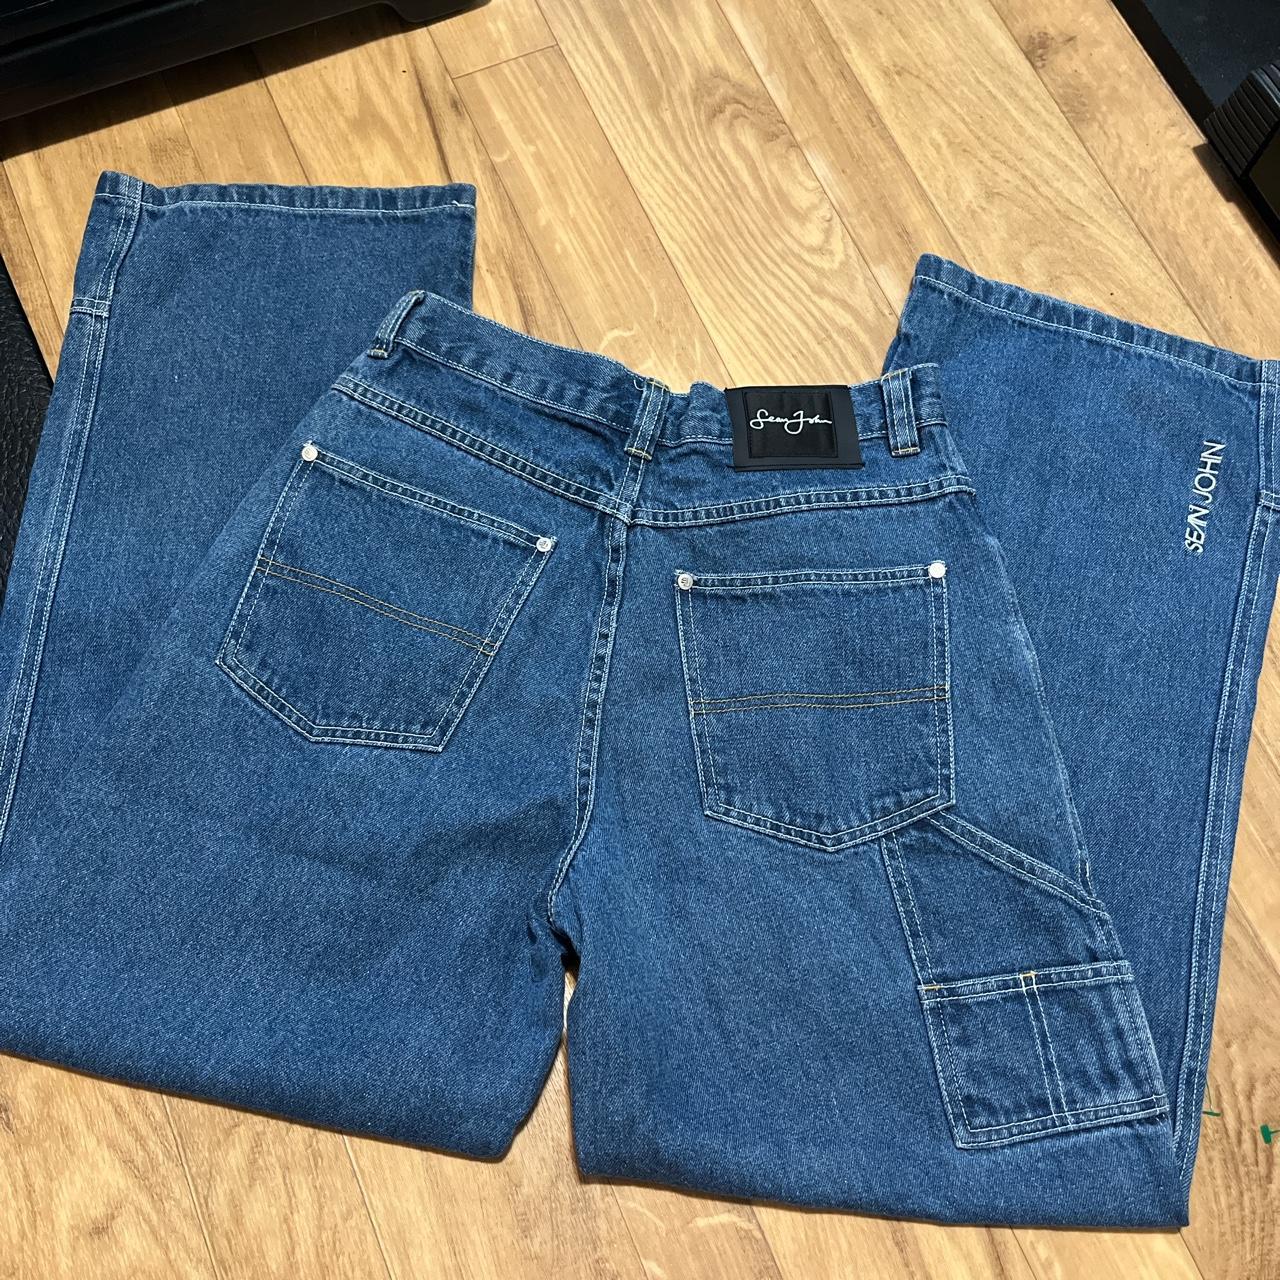 Sean John wide leg baggy fit jeans. These are in... - Depop